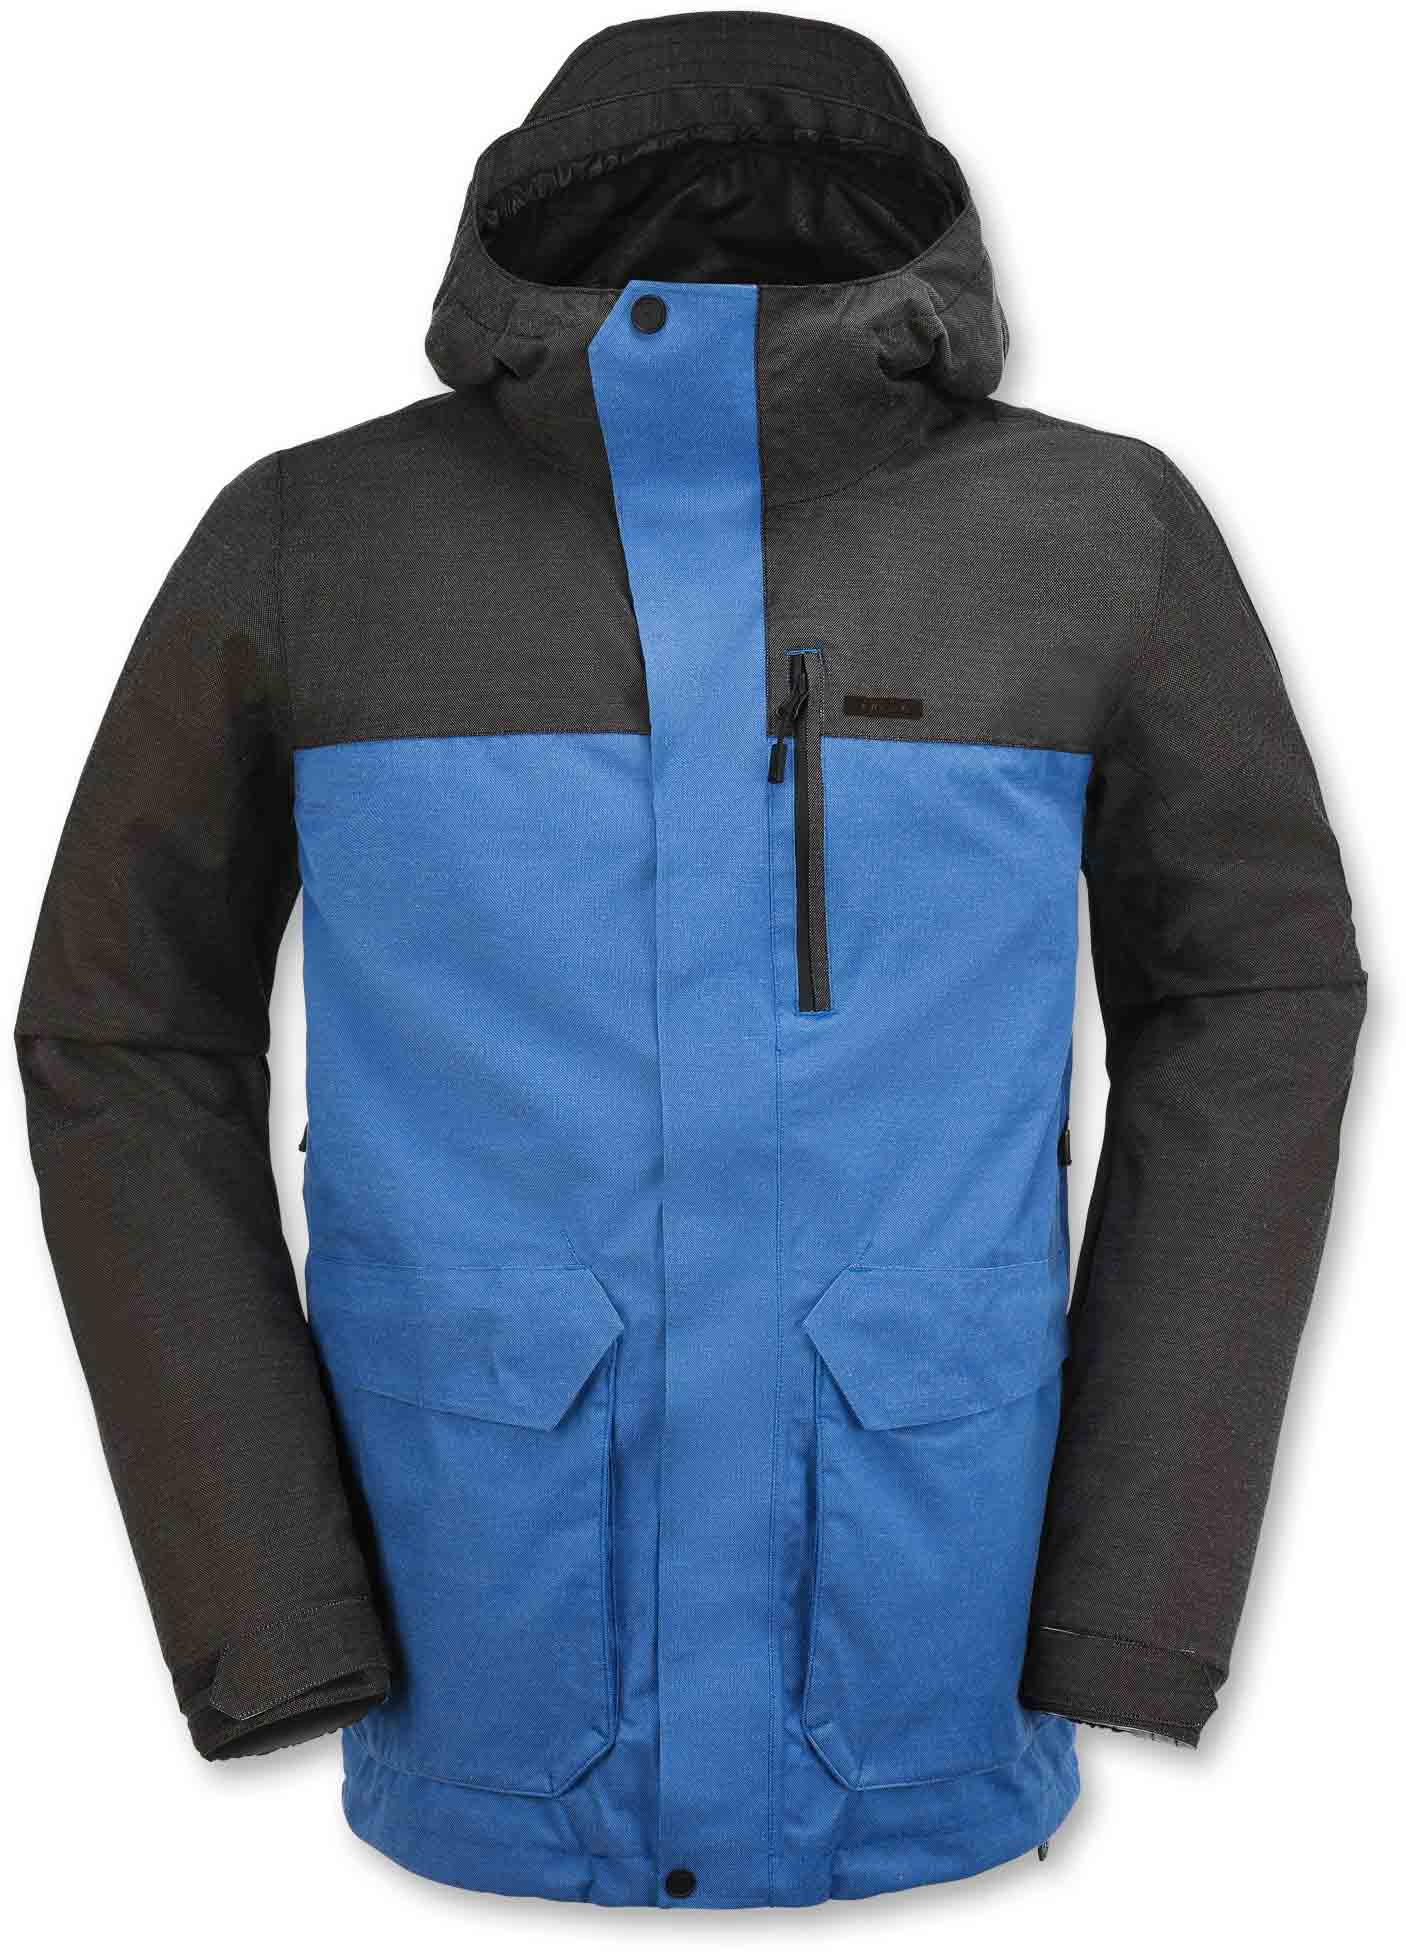 Volcom Lido Snowboard Jacket Review - The Good Ride